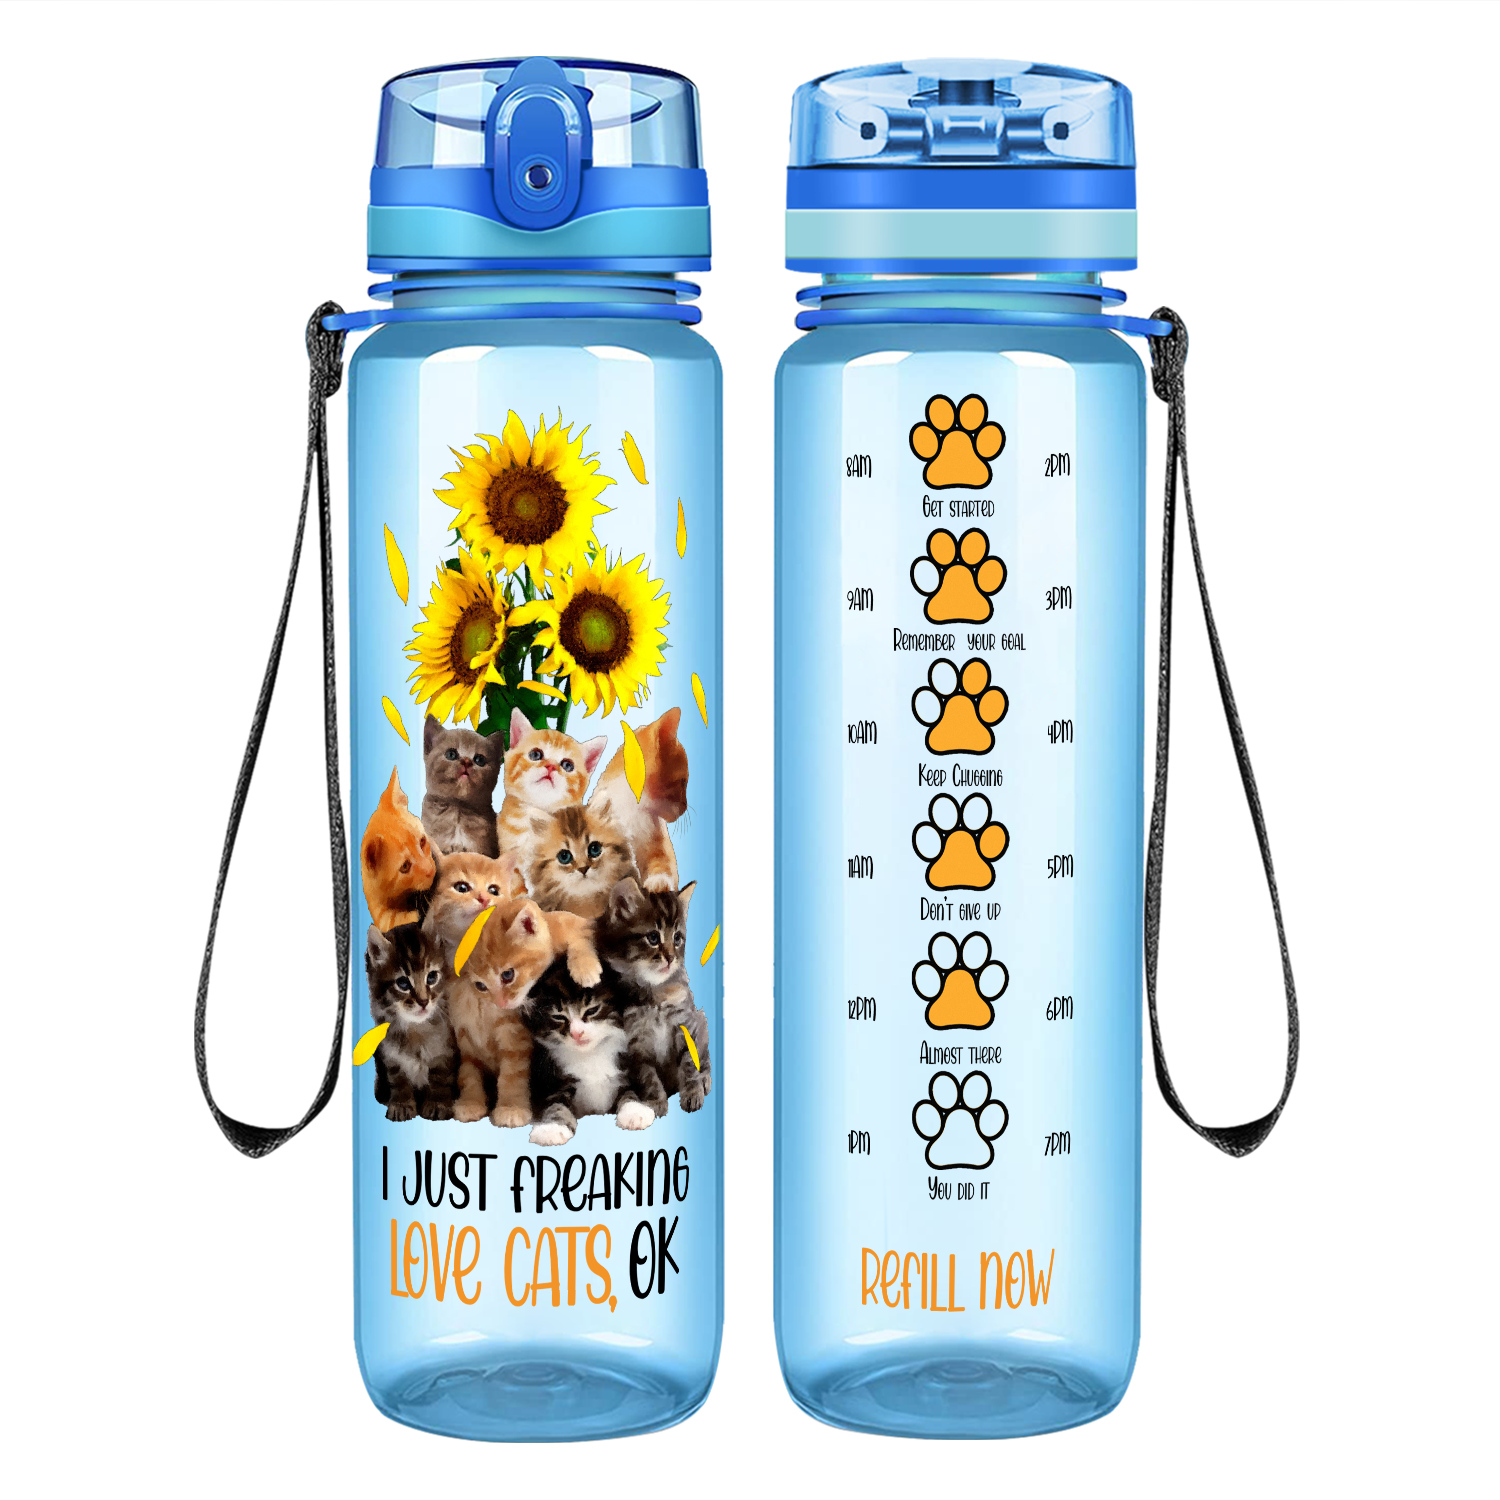 I Just Freaking Love Cats on 32 oz Motivational Tracking Water Bottle